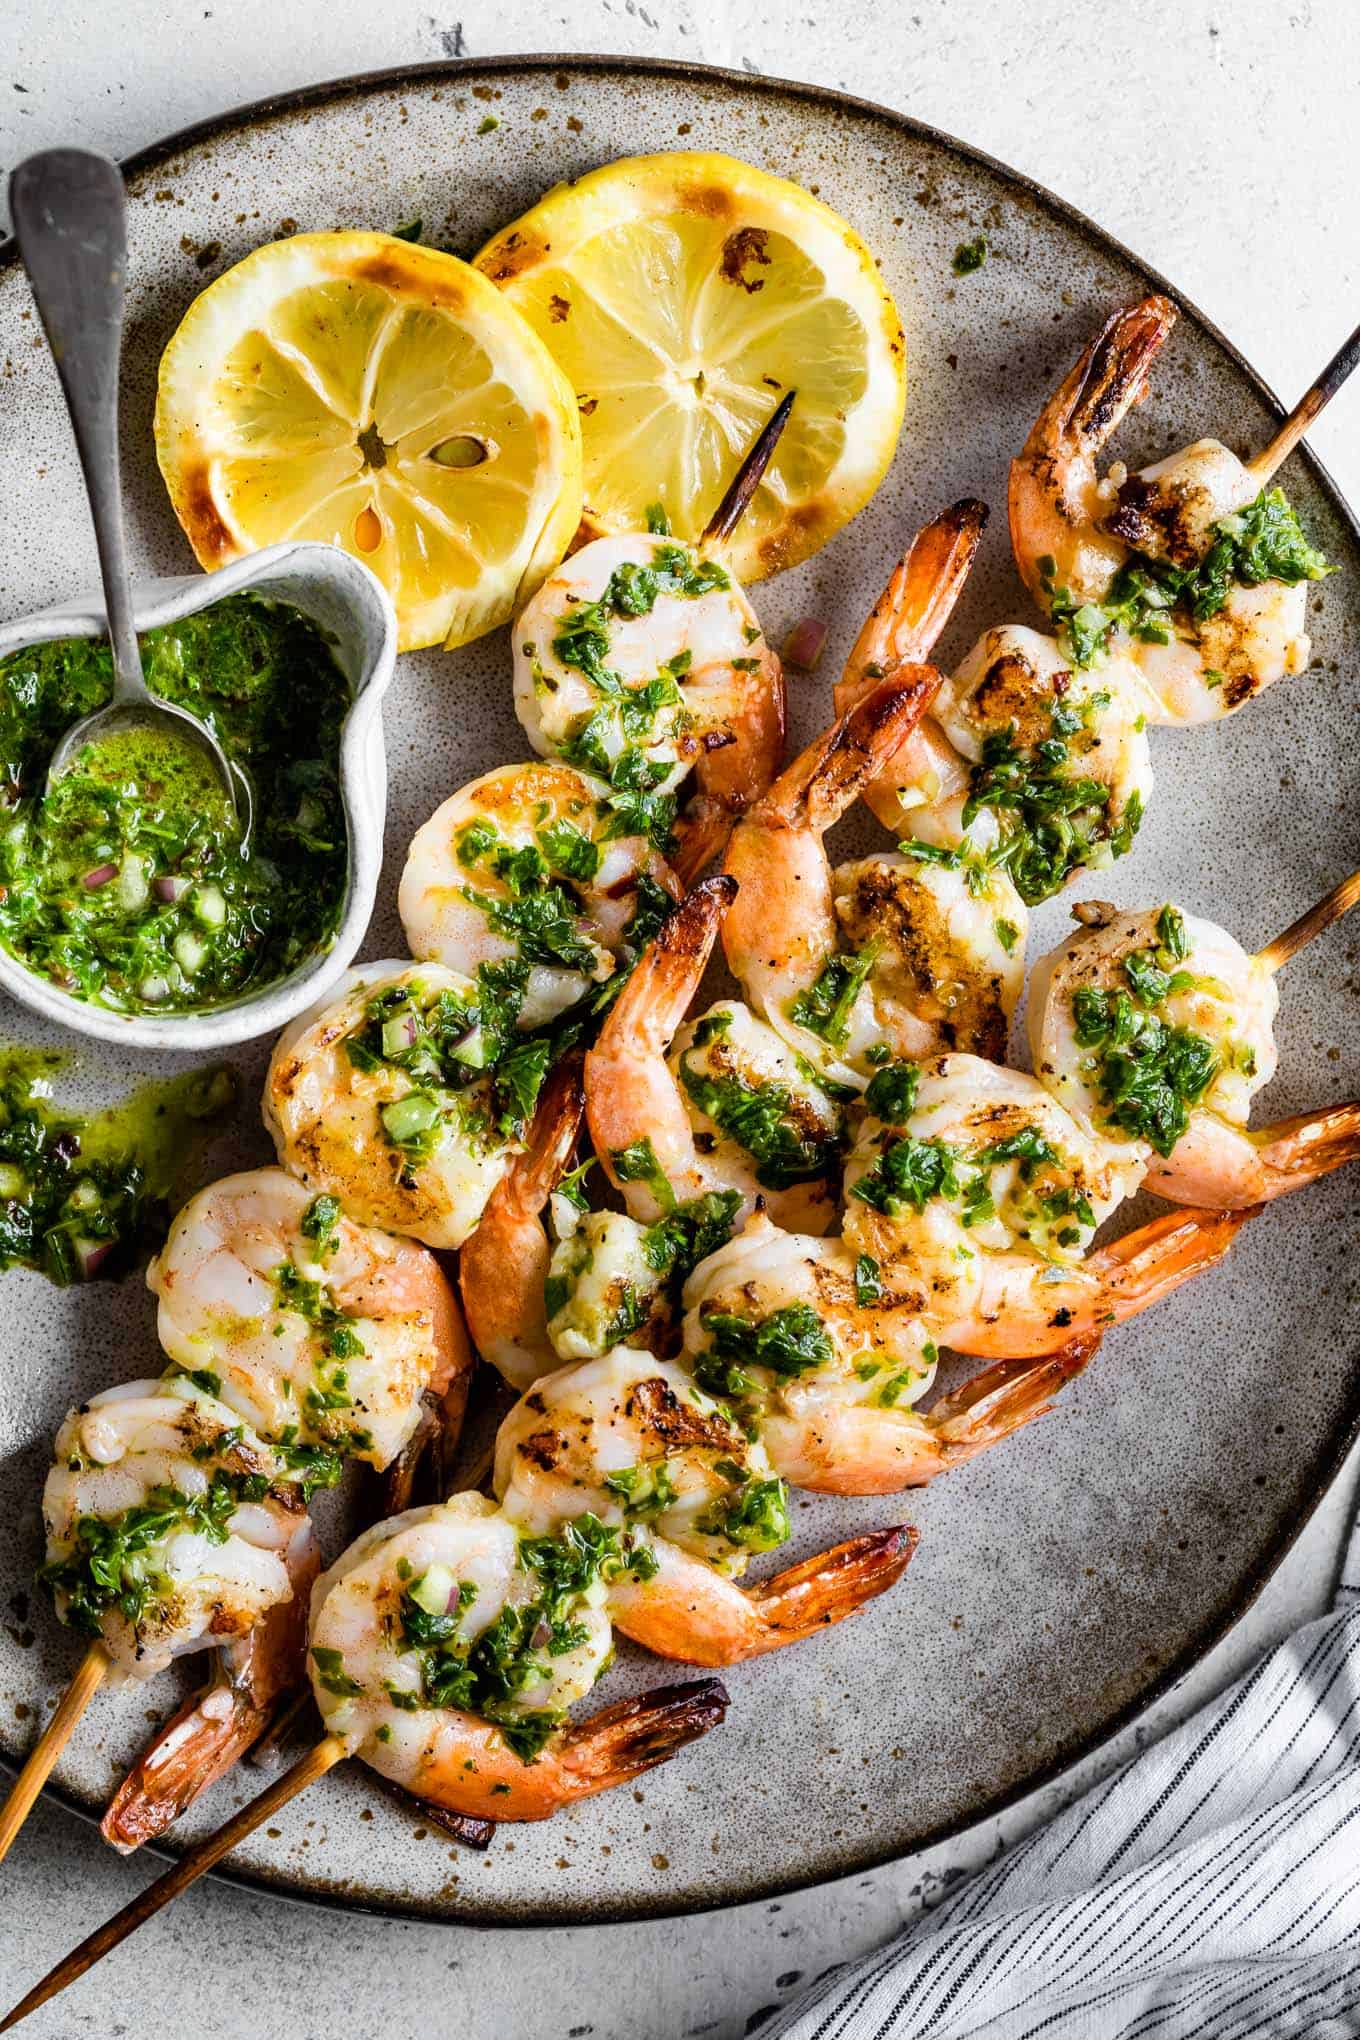 Grilled Chimichurri Shrimp from https://www.snixykitchen.com/